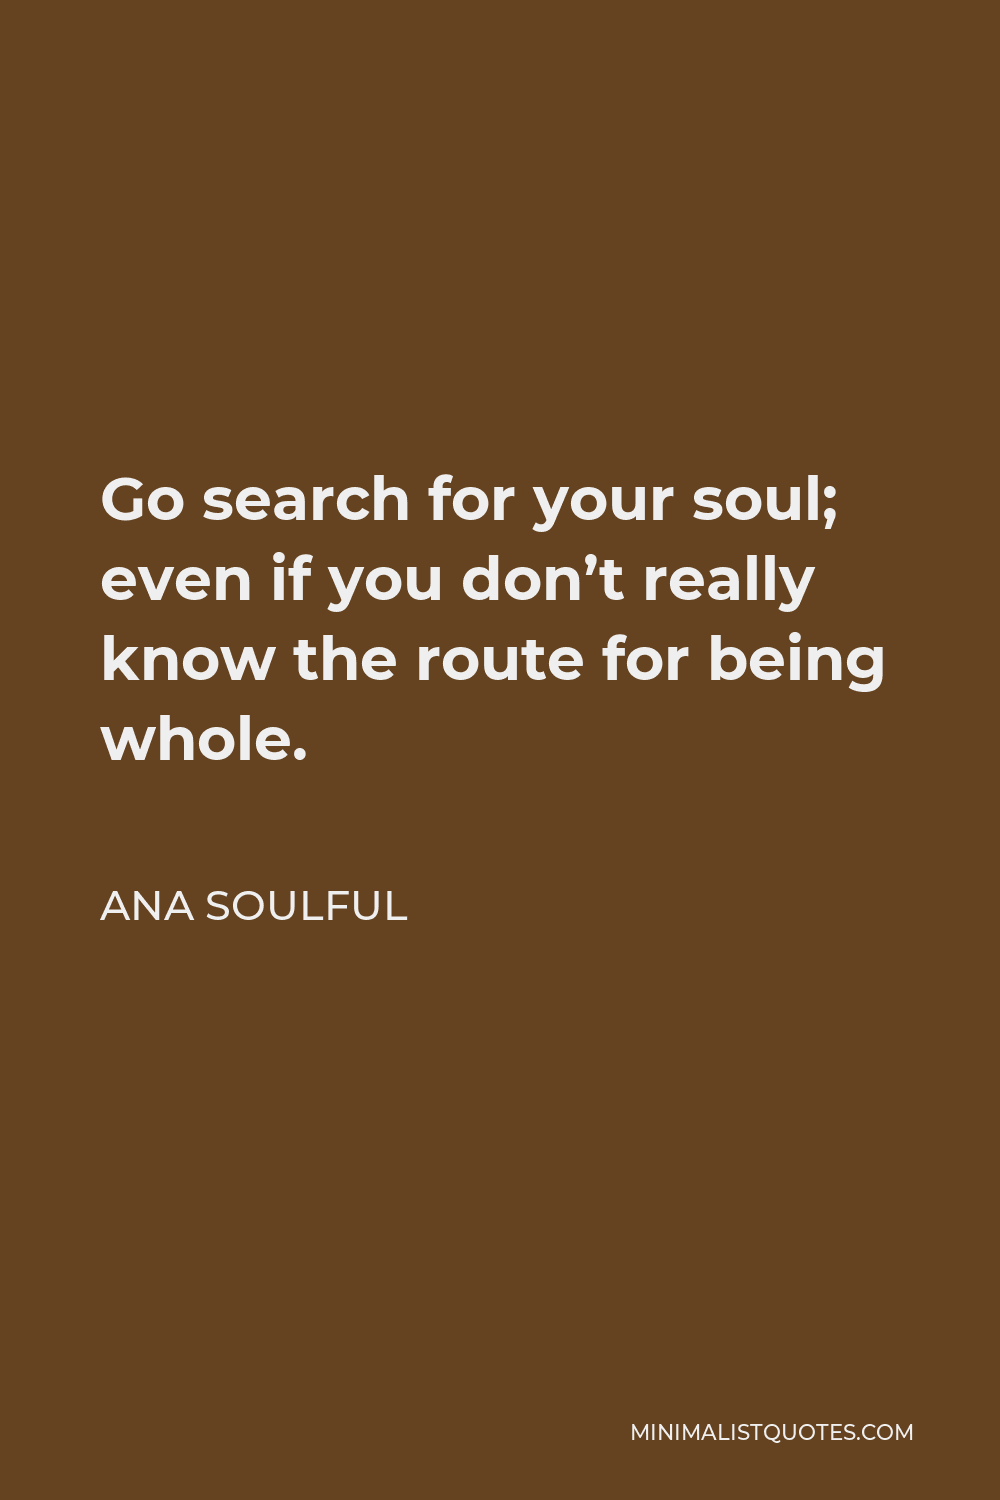 Ana Soulful Quote - Go search for your soul; even if you don’t really know the route for being whole.